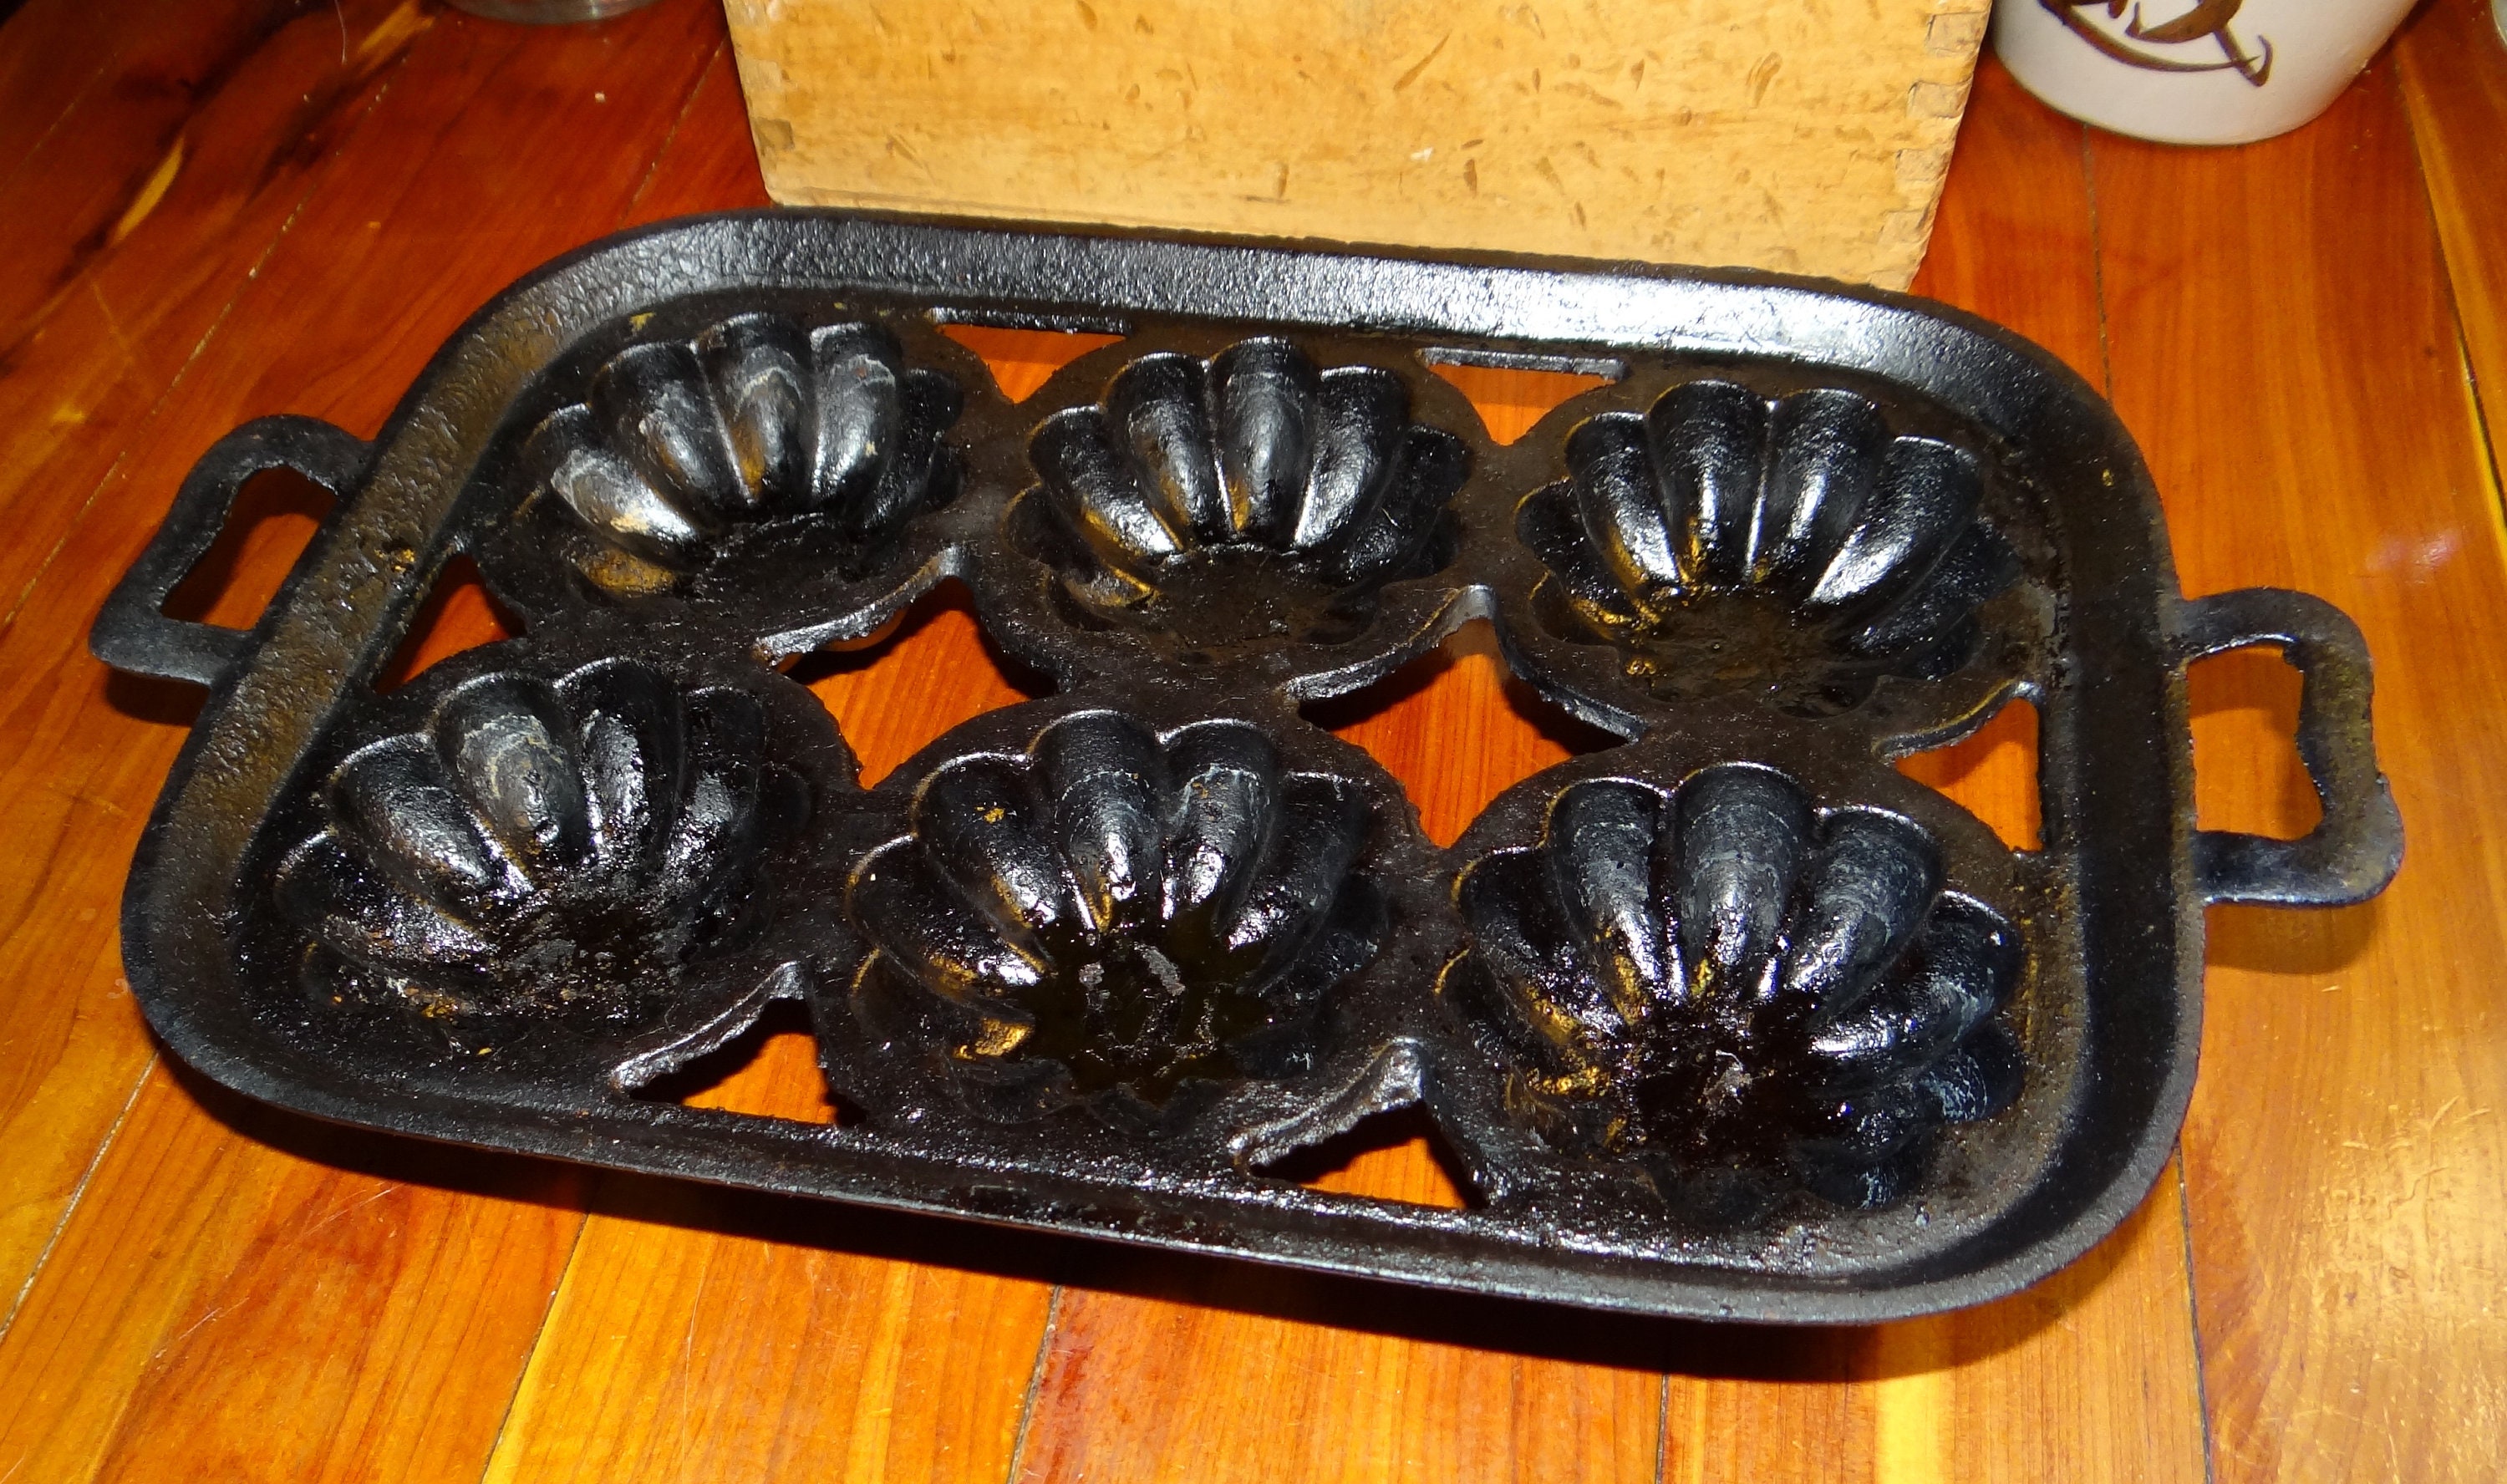 Unmarked Early / Primitive Cast Iron Bundt / Fluted Cake Pan